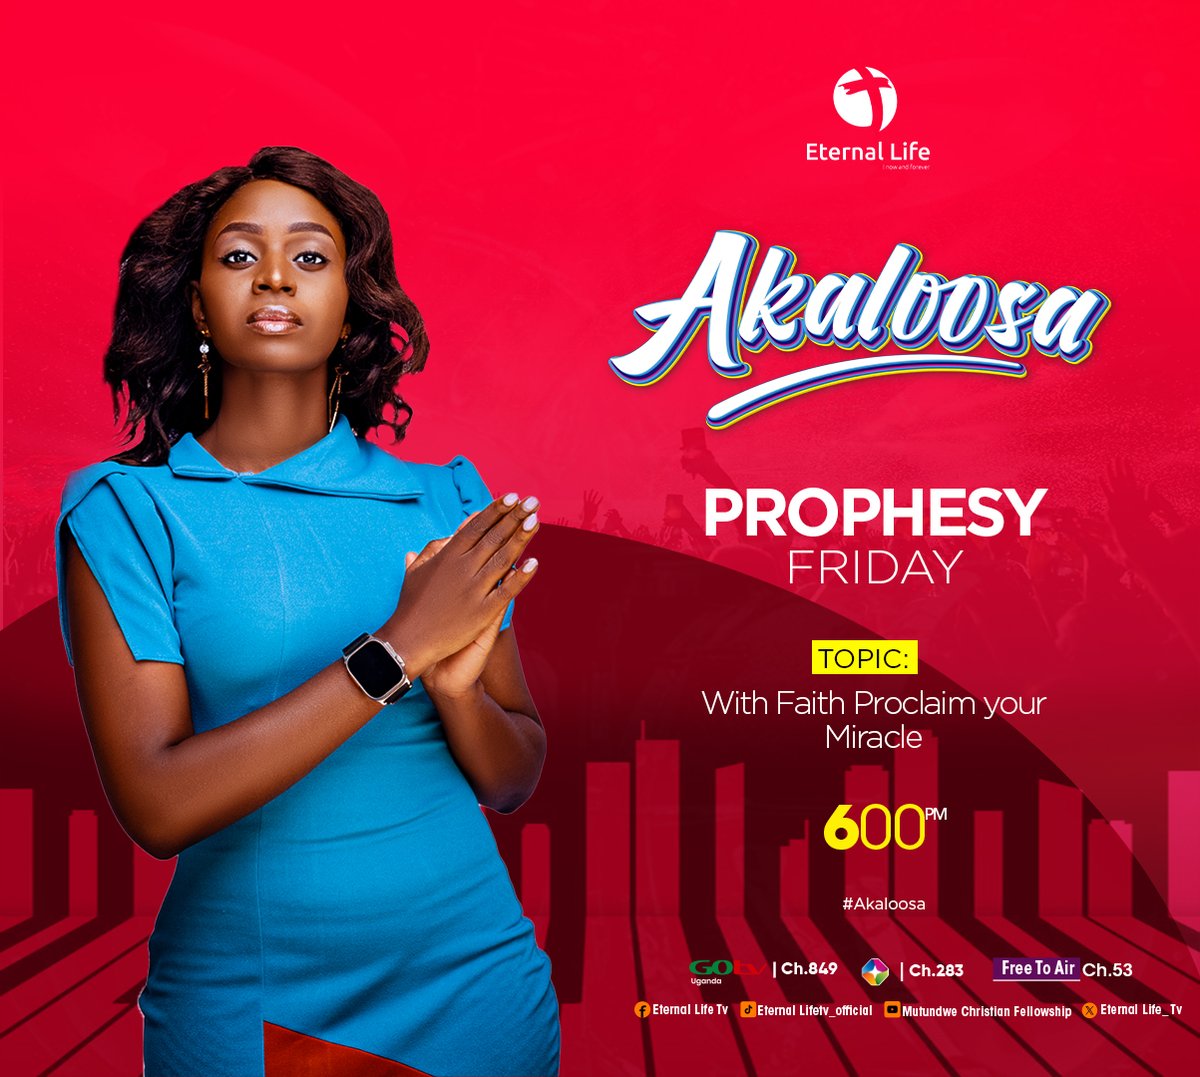 Don't Miss #Akaloosa on @eternallife_tv with @RenezMuzik alongside #SelectaRonnie at 6:00pm. It's a #prophesyFriday, with Faith Proclaim your miracle. Keep sending your regards!!! Watch Eternal Life Tv on GoTV Channel 849 Startimes Channel 283 Free To Air 053